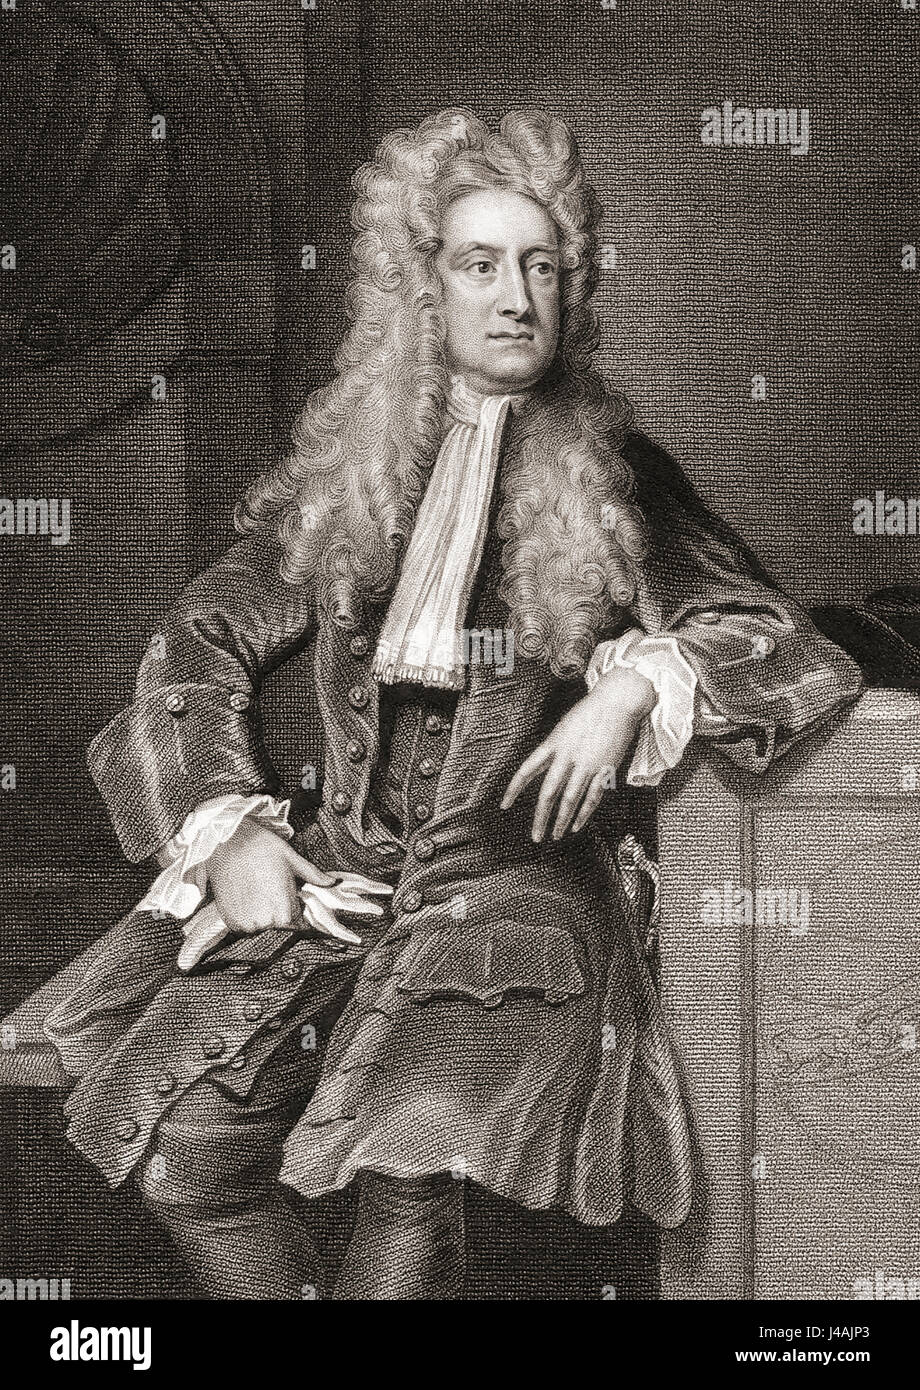 Sir Isaac Newton, 1642 - 1727.  English physicist and mathematical scientist. Stock Photo